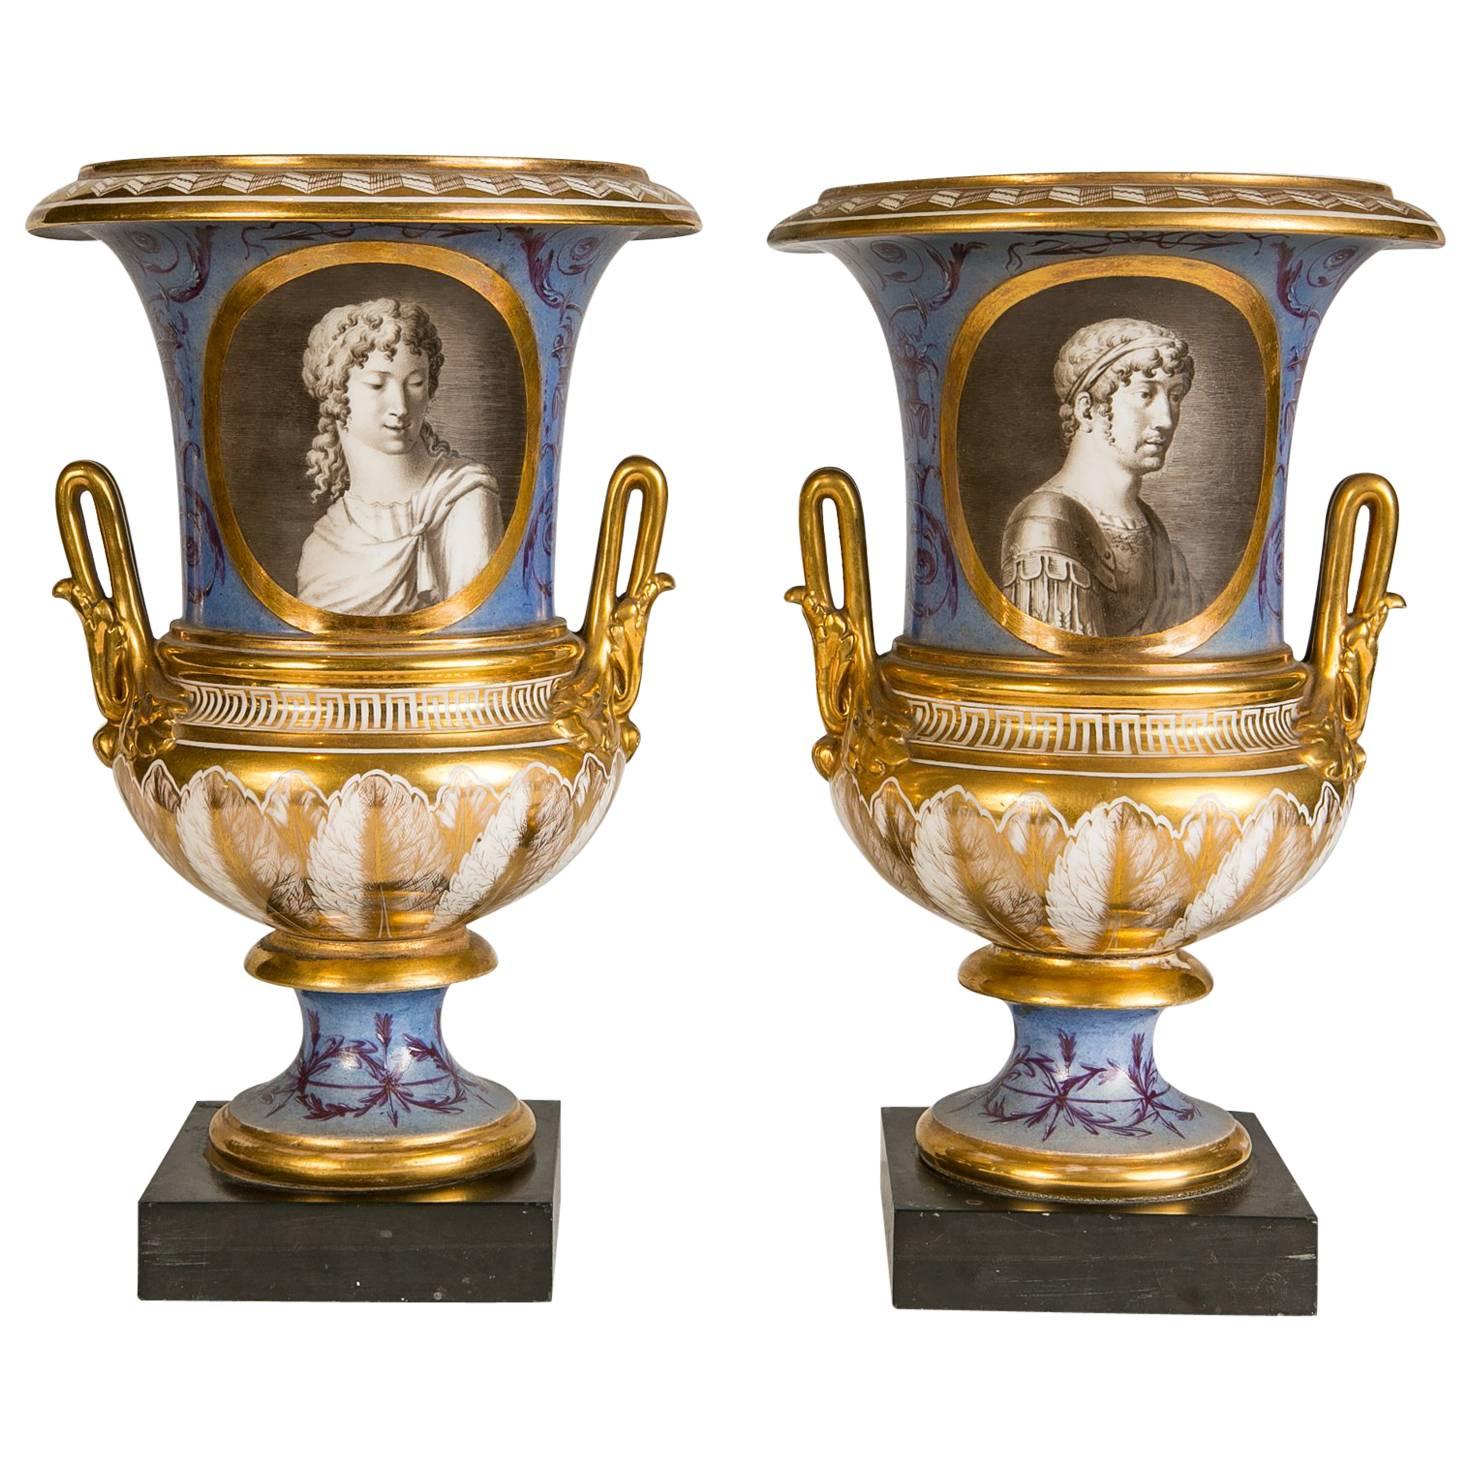 Pair of Neoclassical Portrait Vases Made in France circa 1820